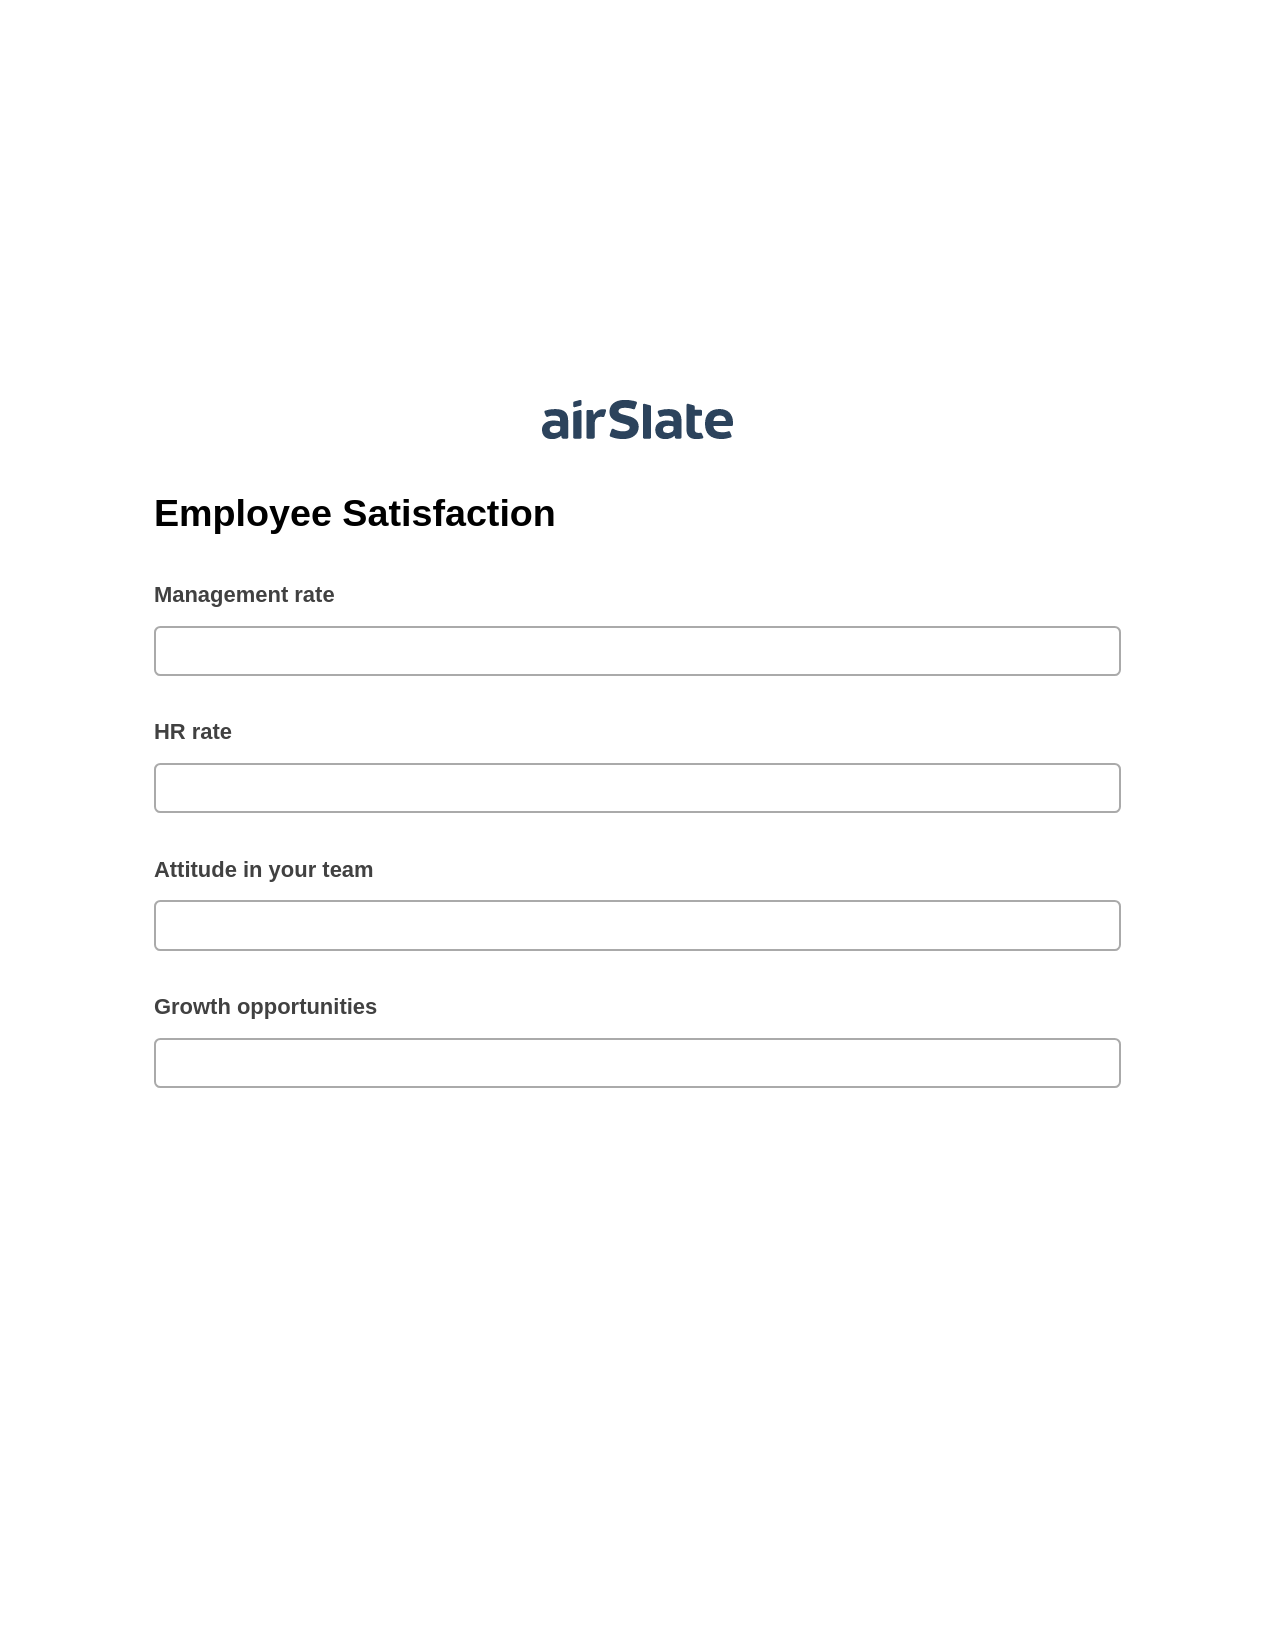 Employee Satisfaction Pre-fill Slate from MS Dynamics 365 Records Bot, Unassign Role Bot, Export to Excel 365 Bot